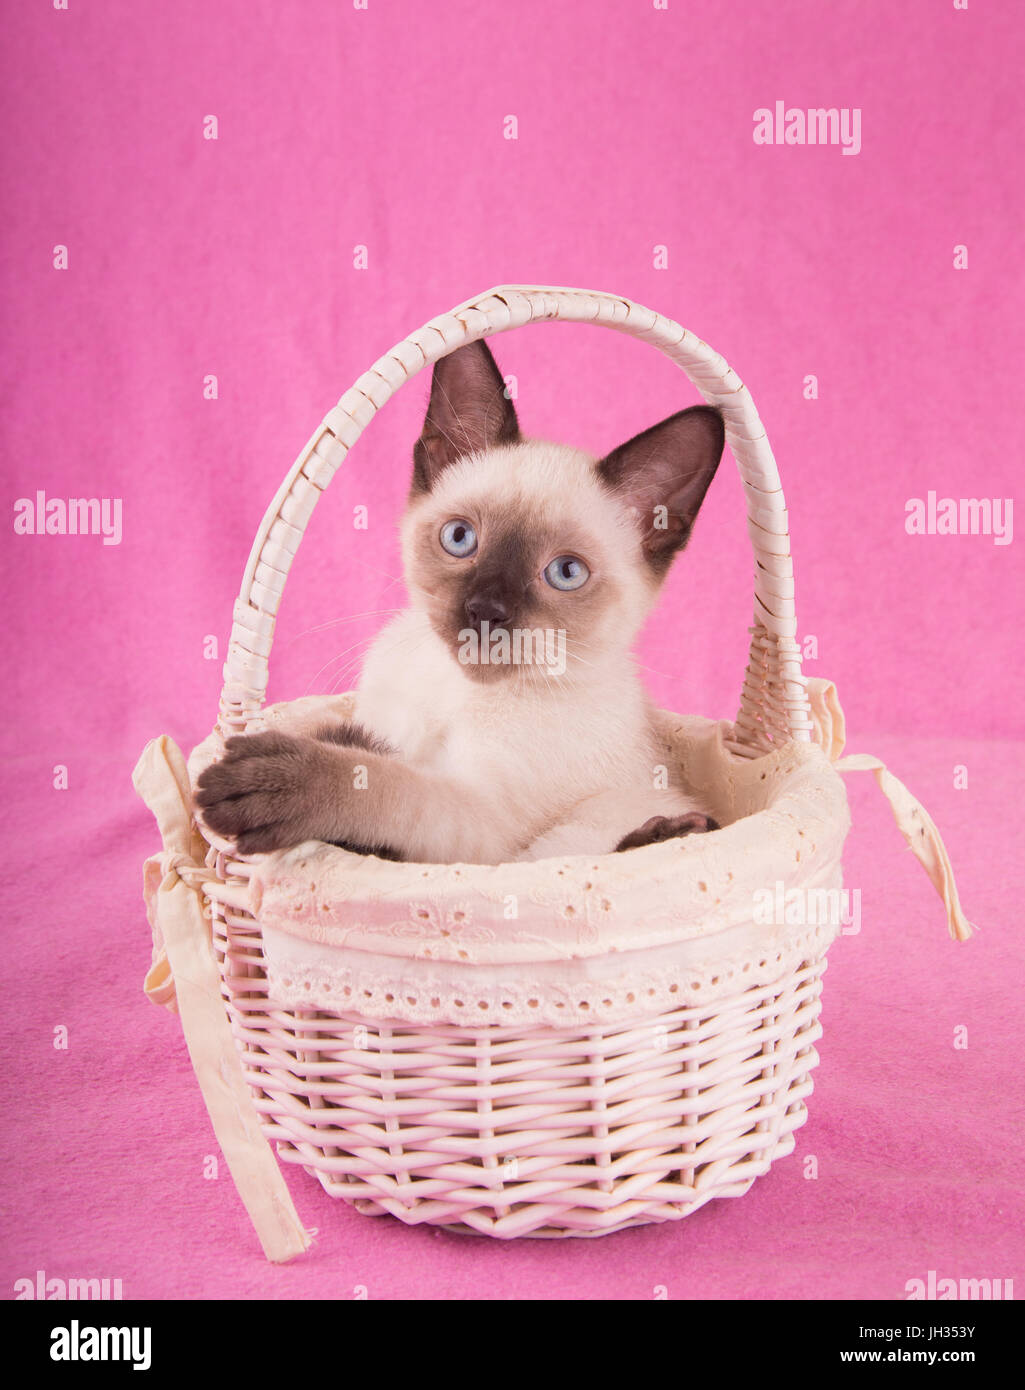 Absolutely adorable Siamese kitten in an off white basket, looking up, with a pink background Stock Photo